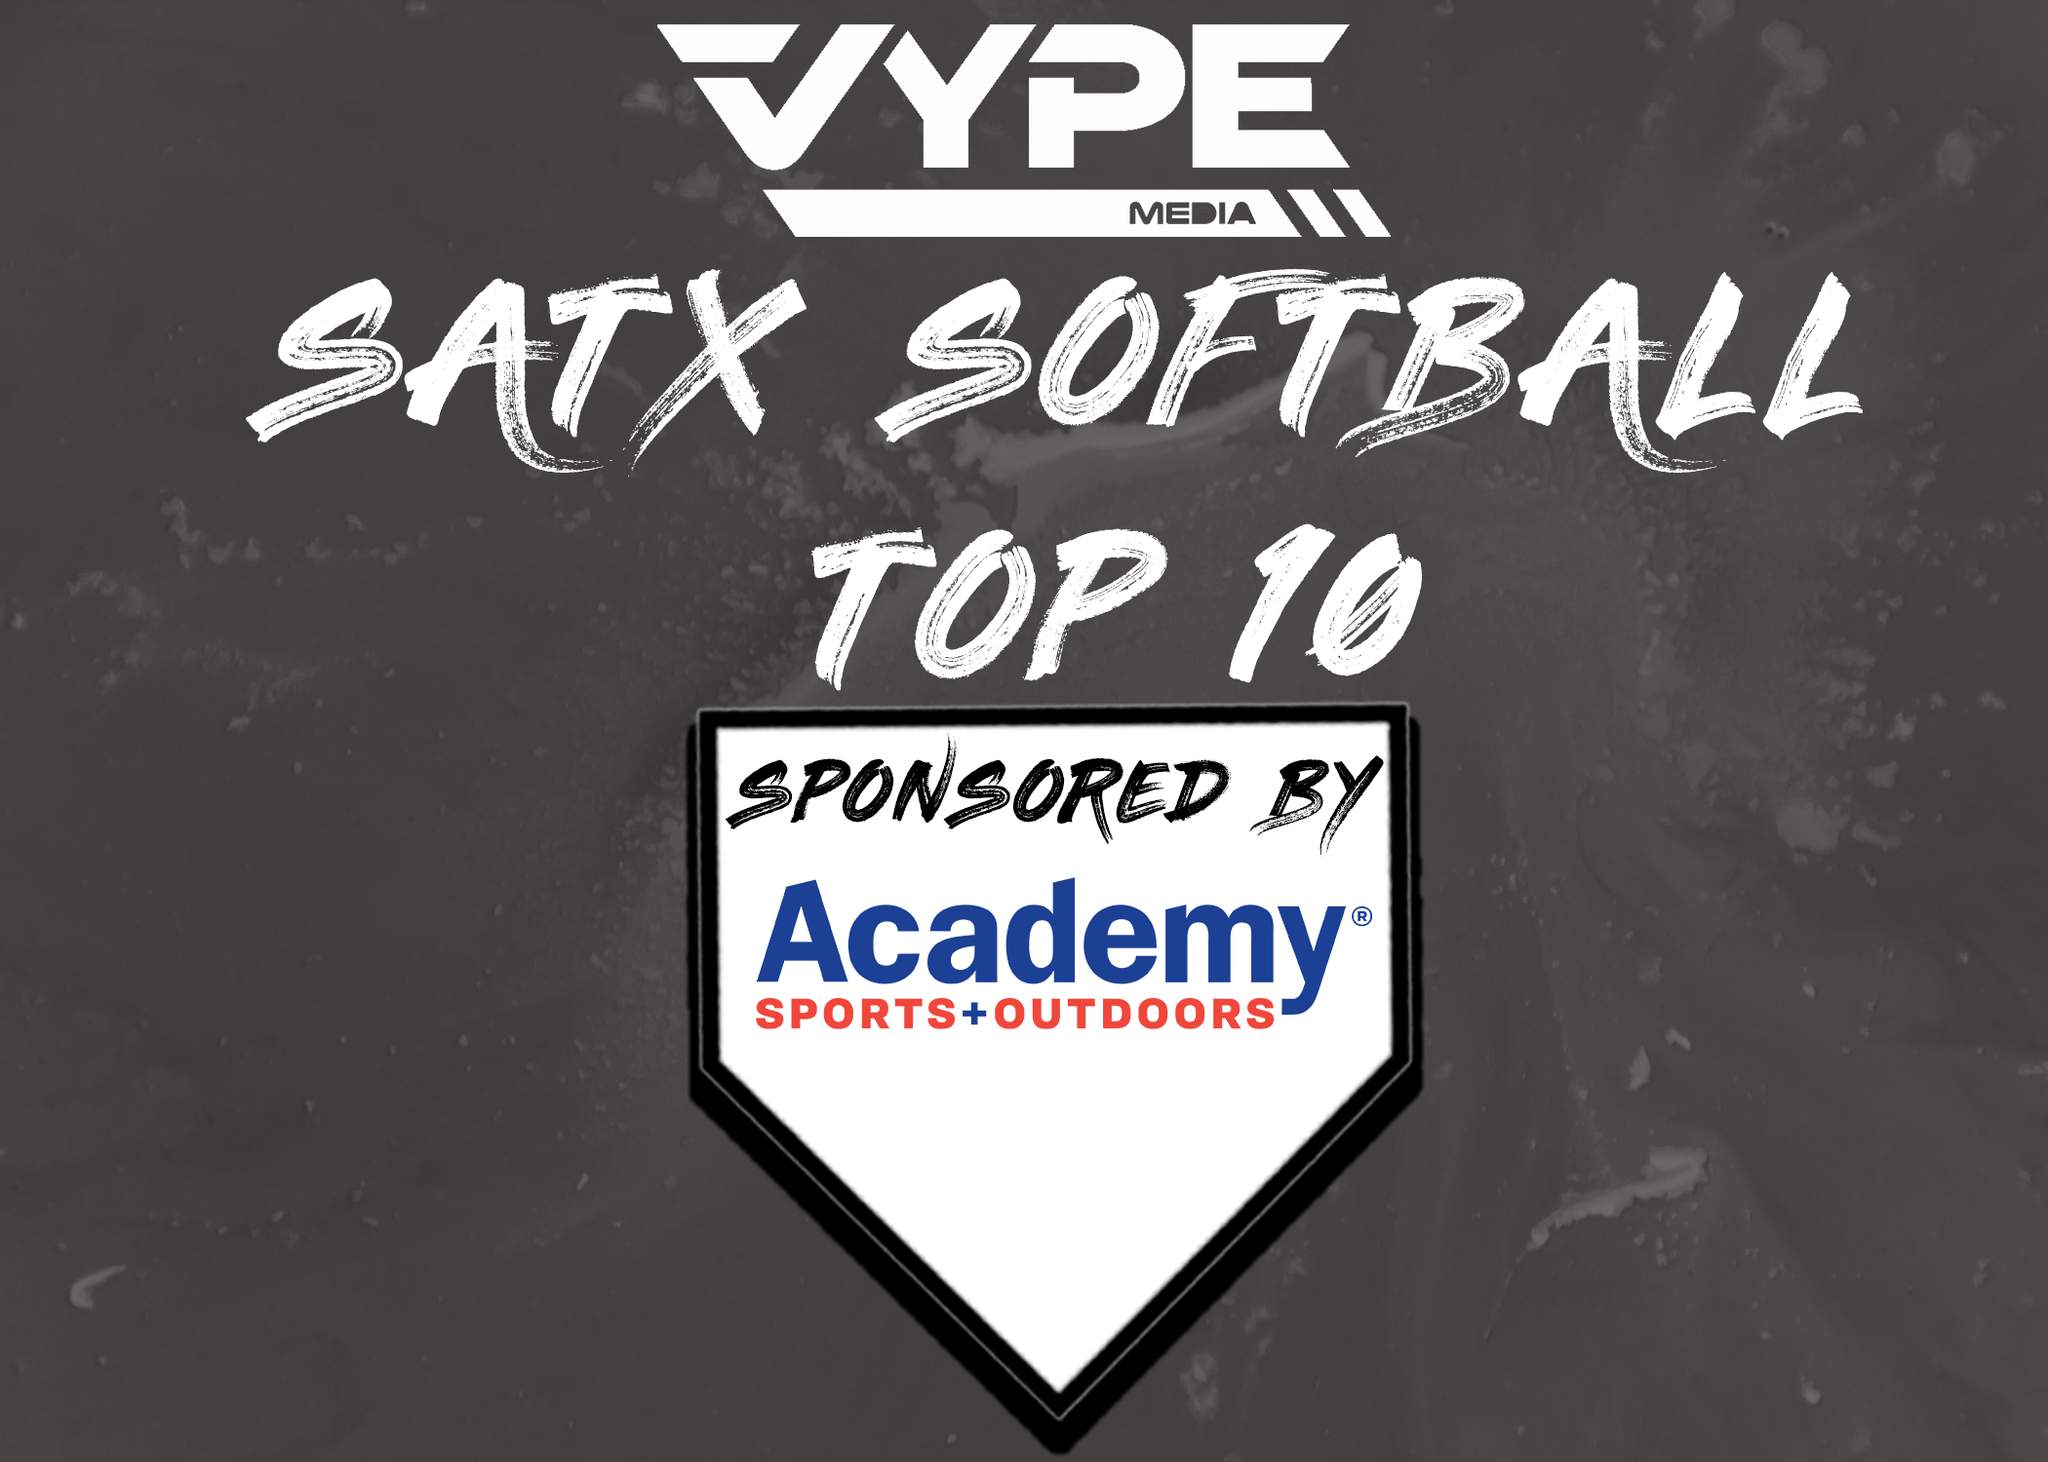 VYPE San Antonio Softball Top 10 Rankings: Week of 03/22/2021 presented by Academy Sports + Outdoors